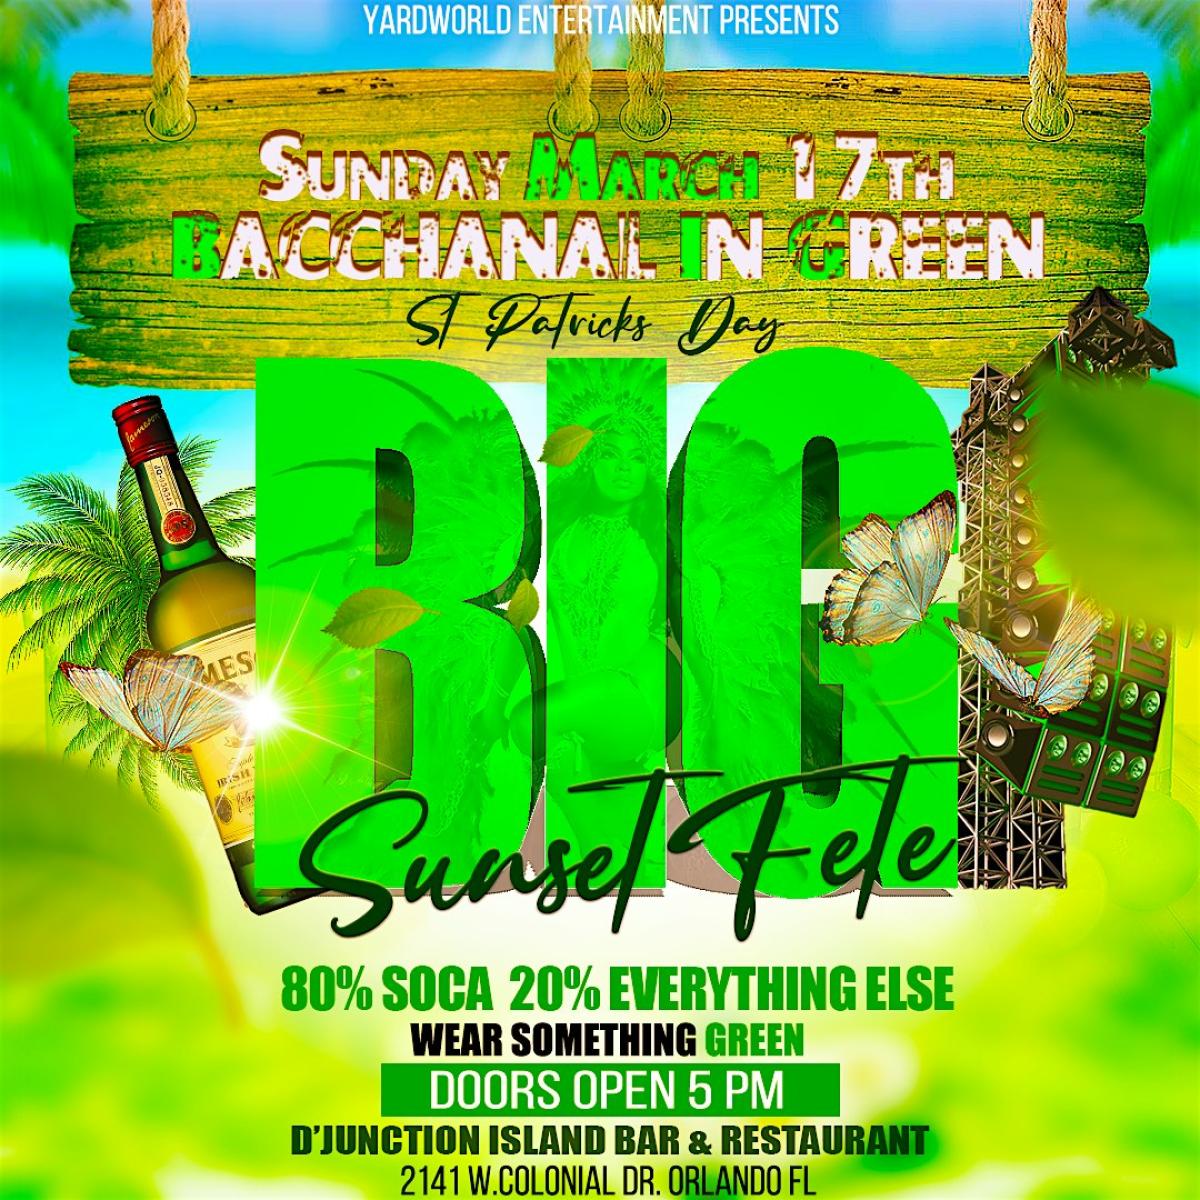 Bacchanal In Green  flyer or graphic.